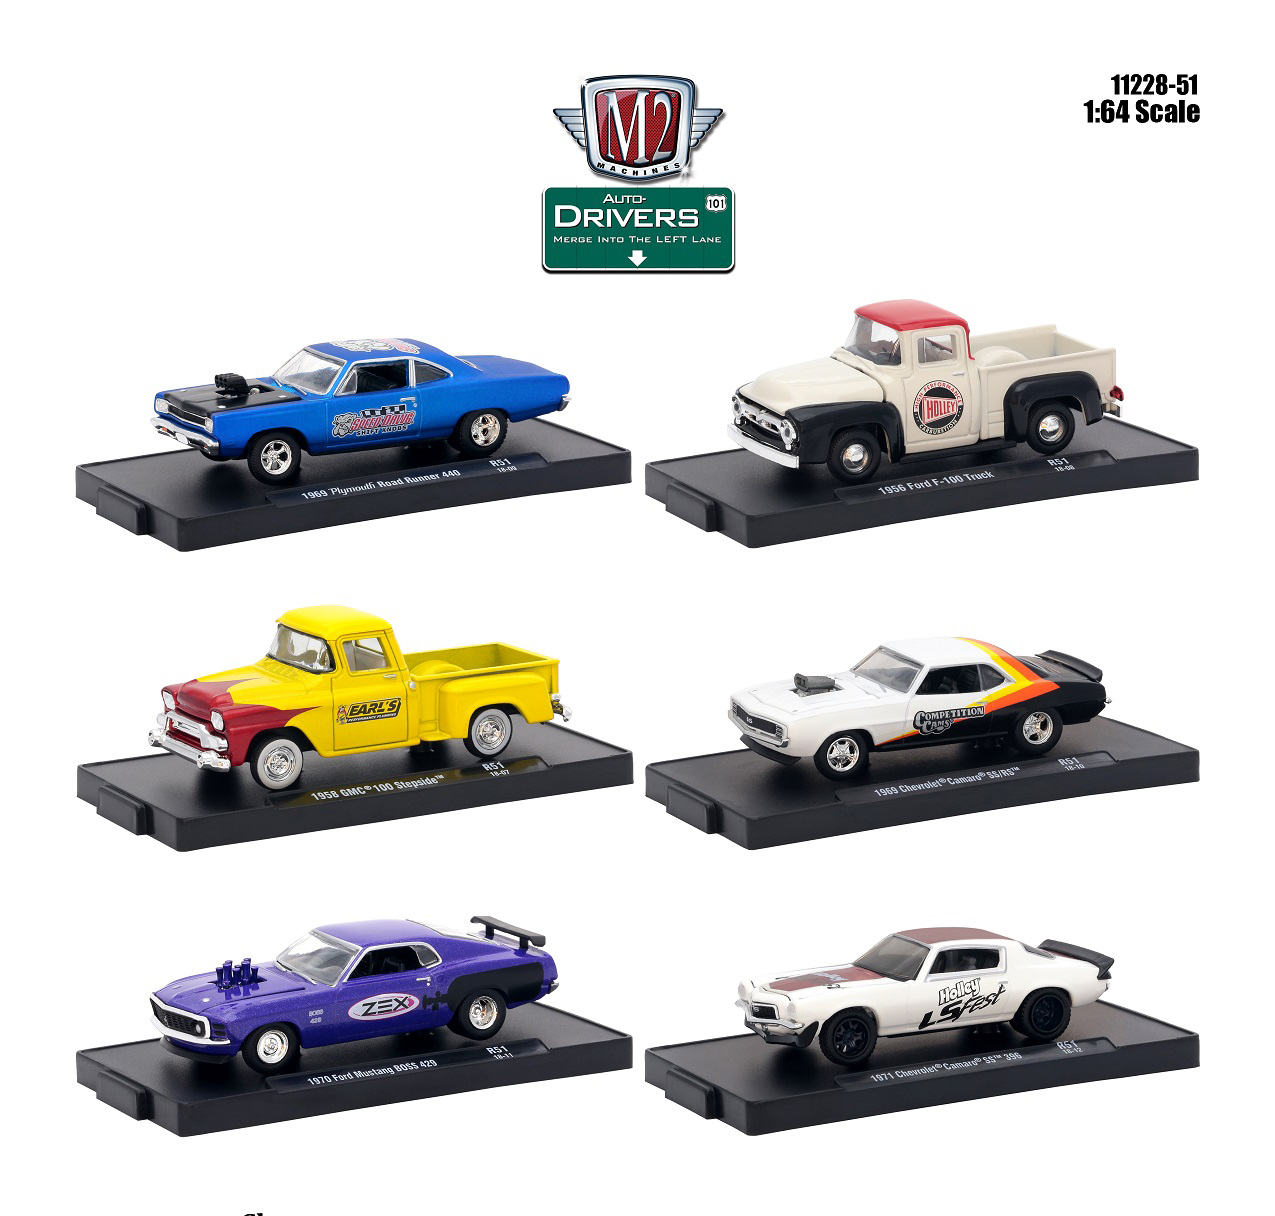 Drivers 6 Cars Set Release 51 In Blister Packs 1/64 Diecast Model Cars By M2 Machines